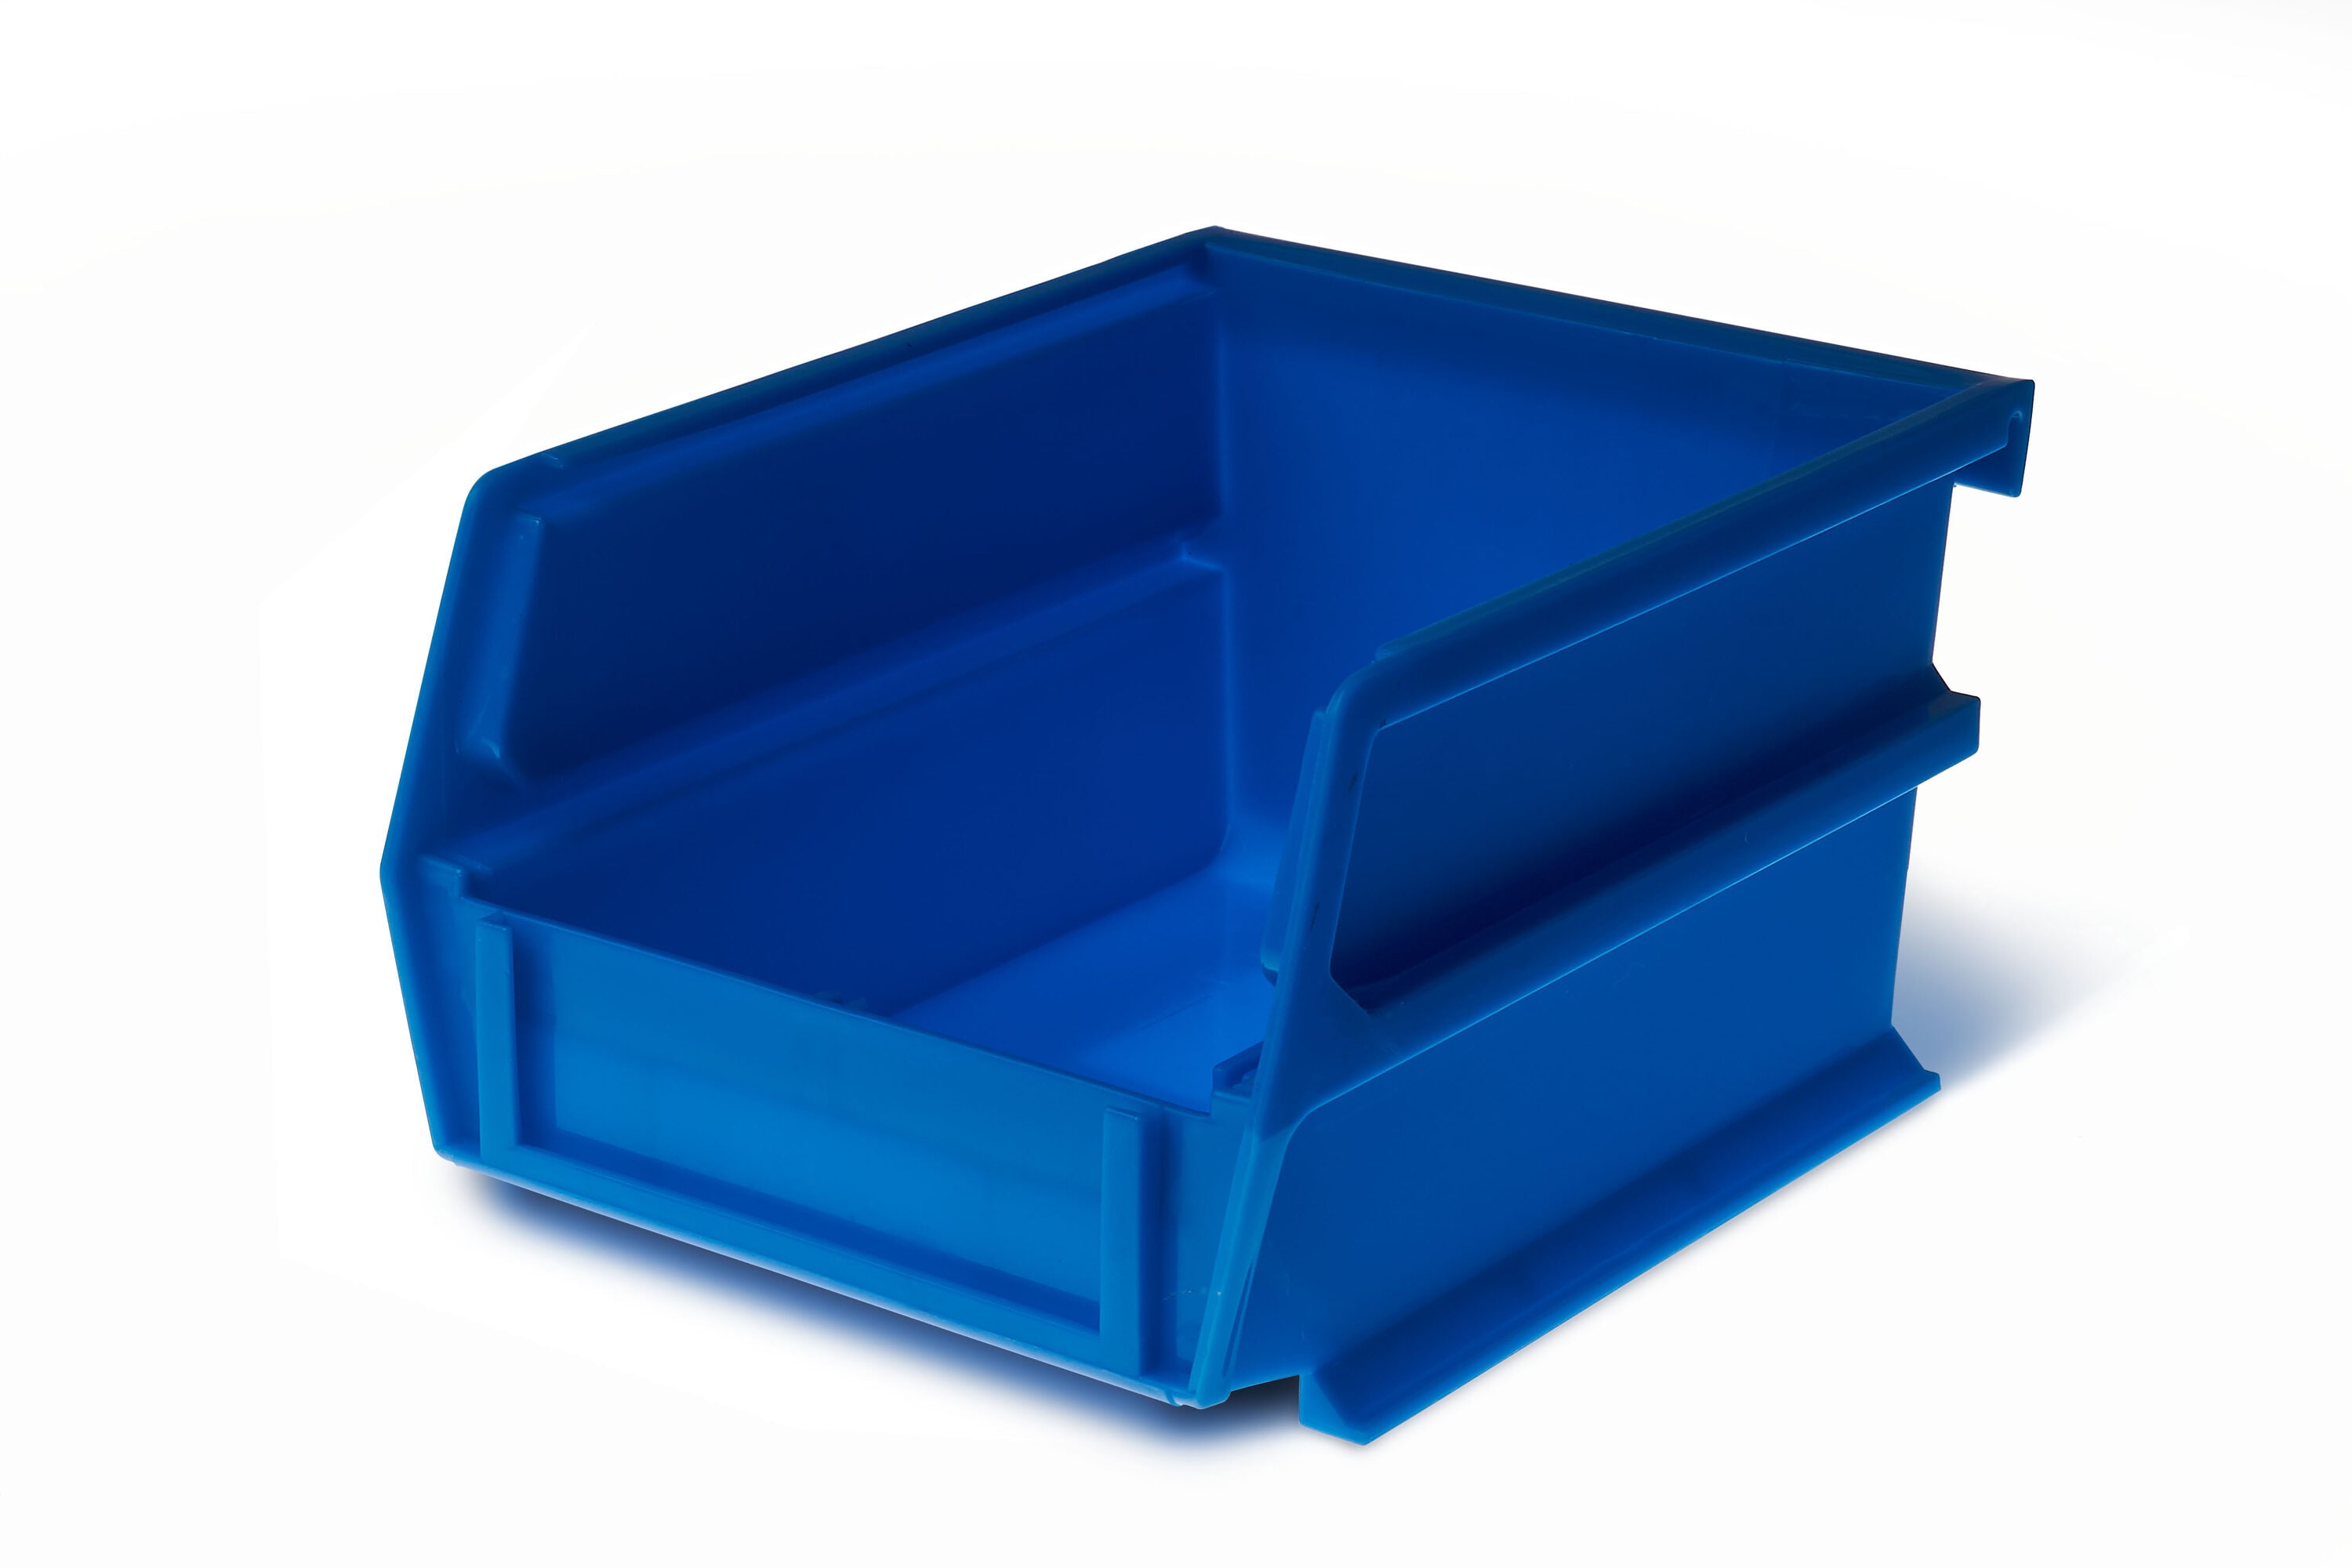 Style Selections 22.3-in W x 22.3-in H x 16.5-in D Blue Plastic